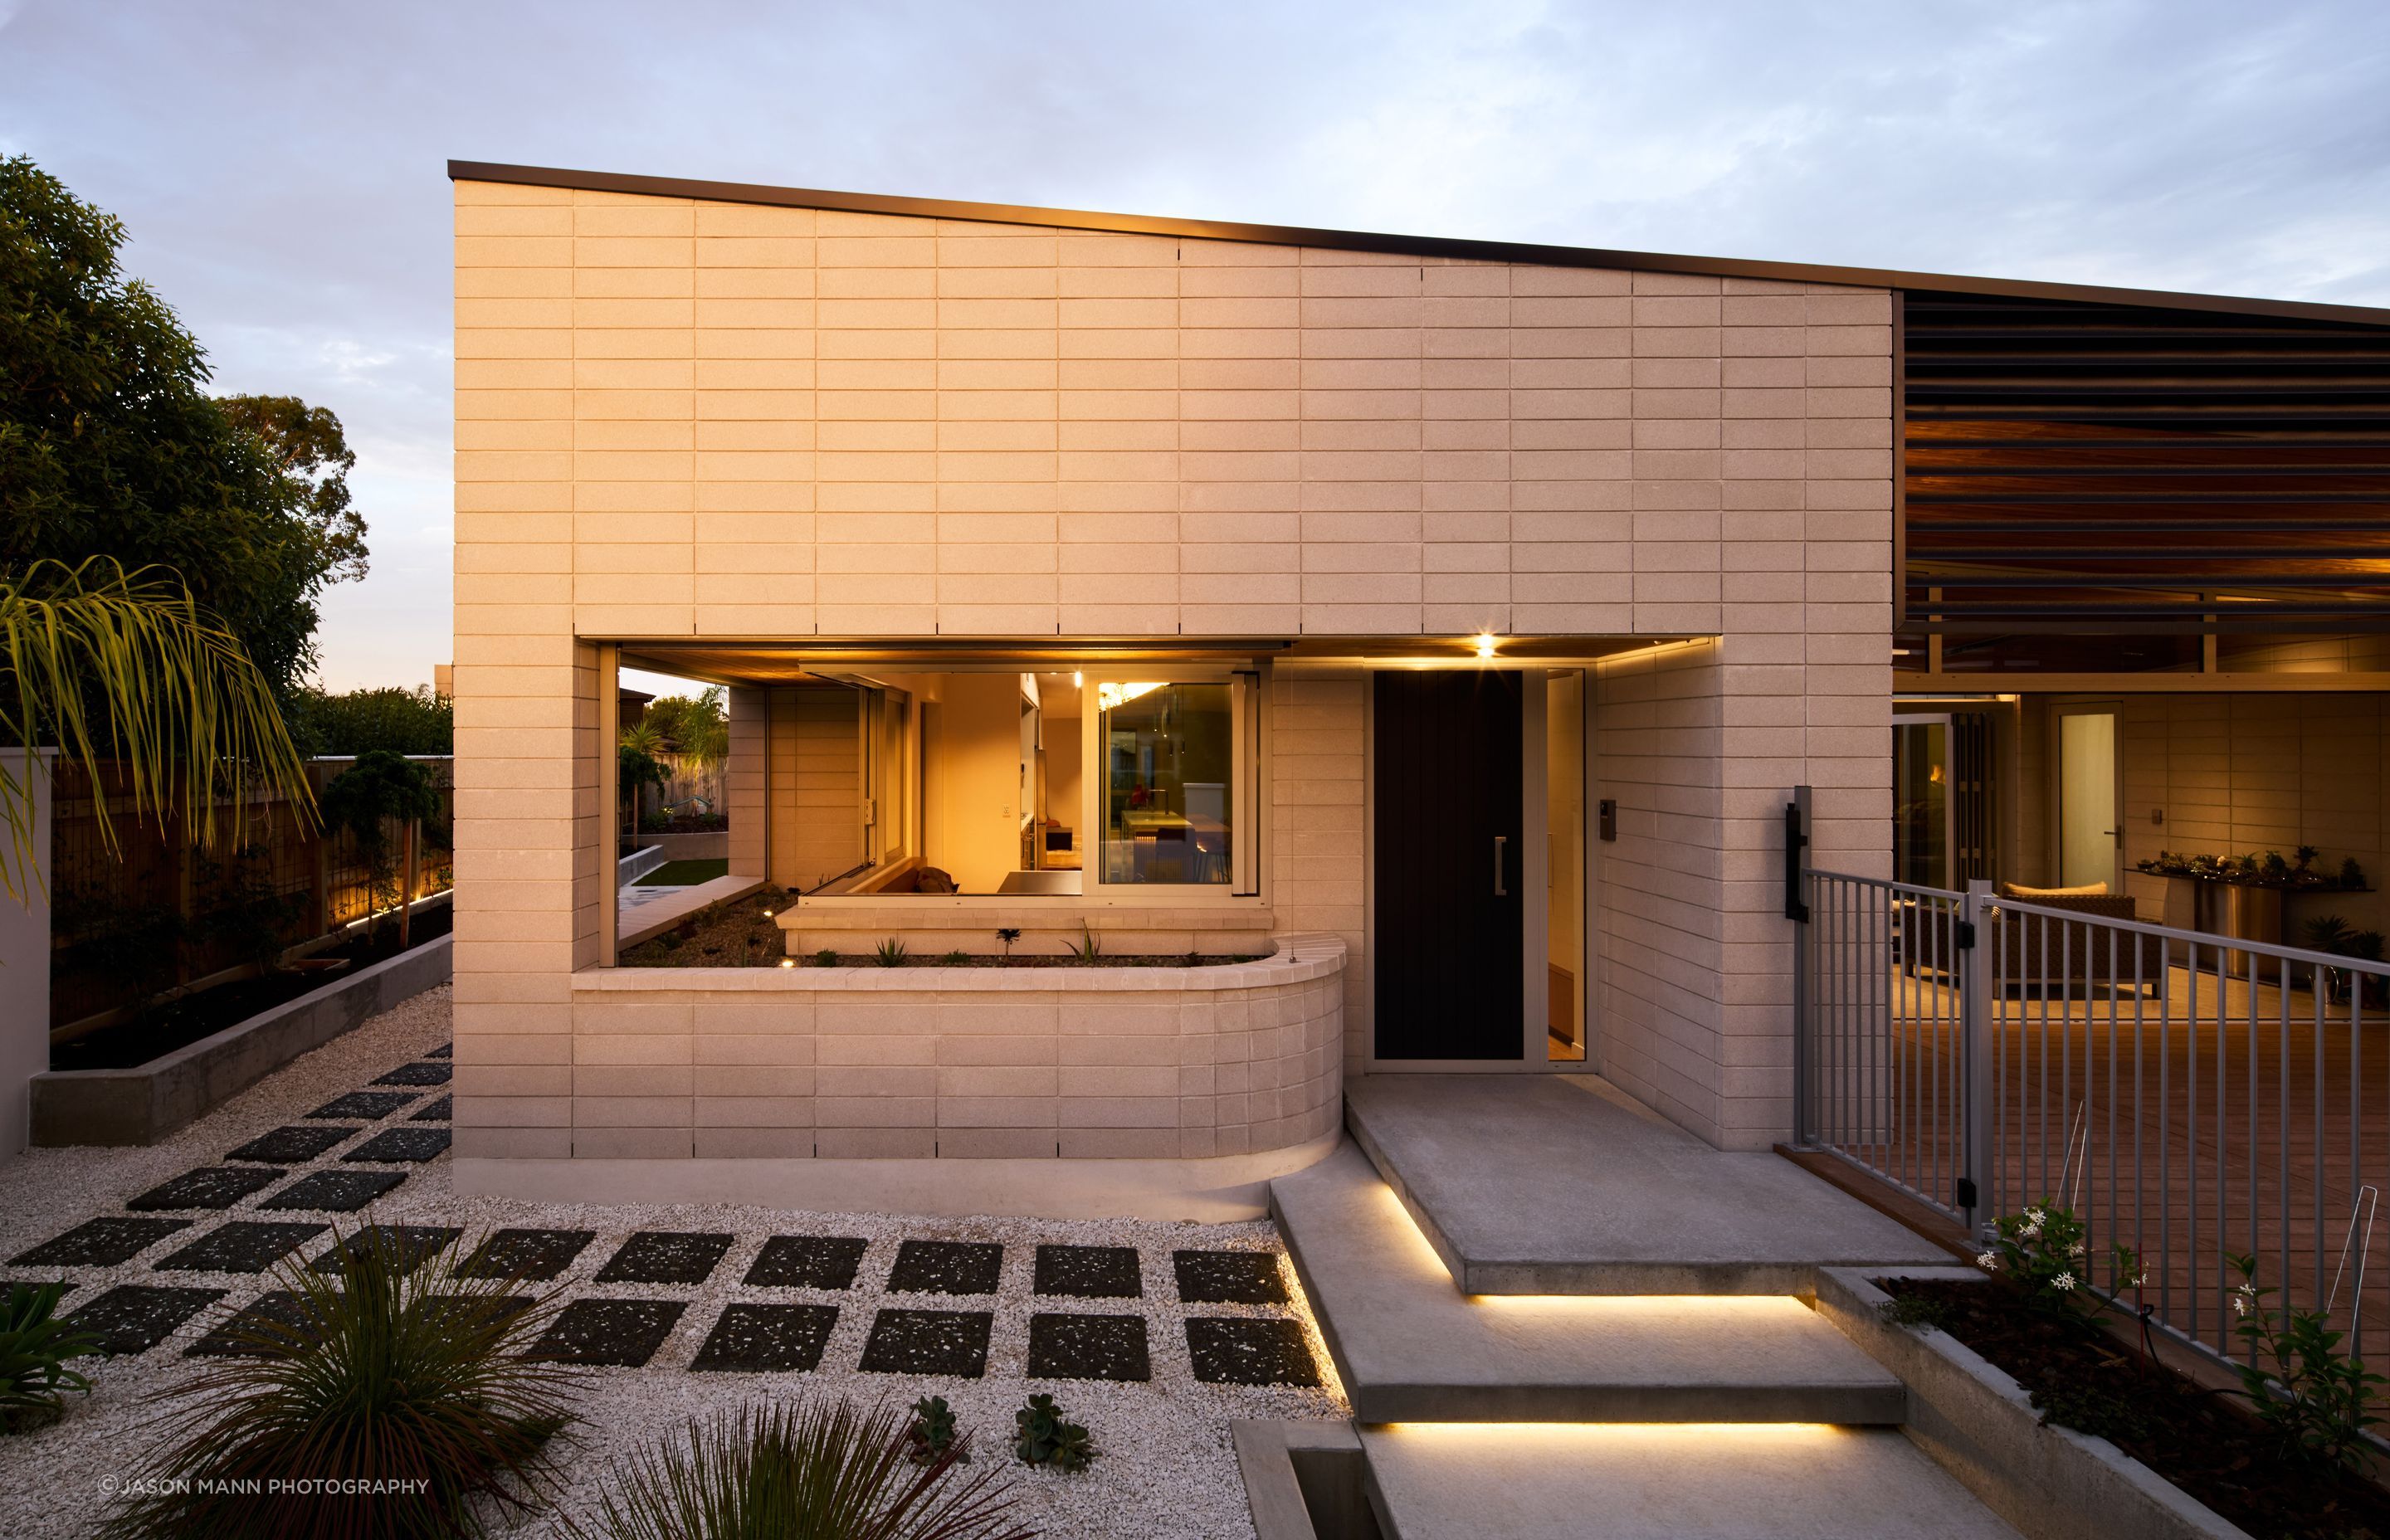 The homeowners, originally from Spain and the UK, came to New Zealand about 15 years ago. Now empty-nesters, their Palmerston North home designed by Nick Officer of First Light Studio in Wellington is perfectly suited to their lifestyle. The low-maintenance private facade belies a layout that can easily accommodate two, or a crowd.